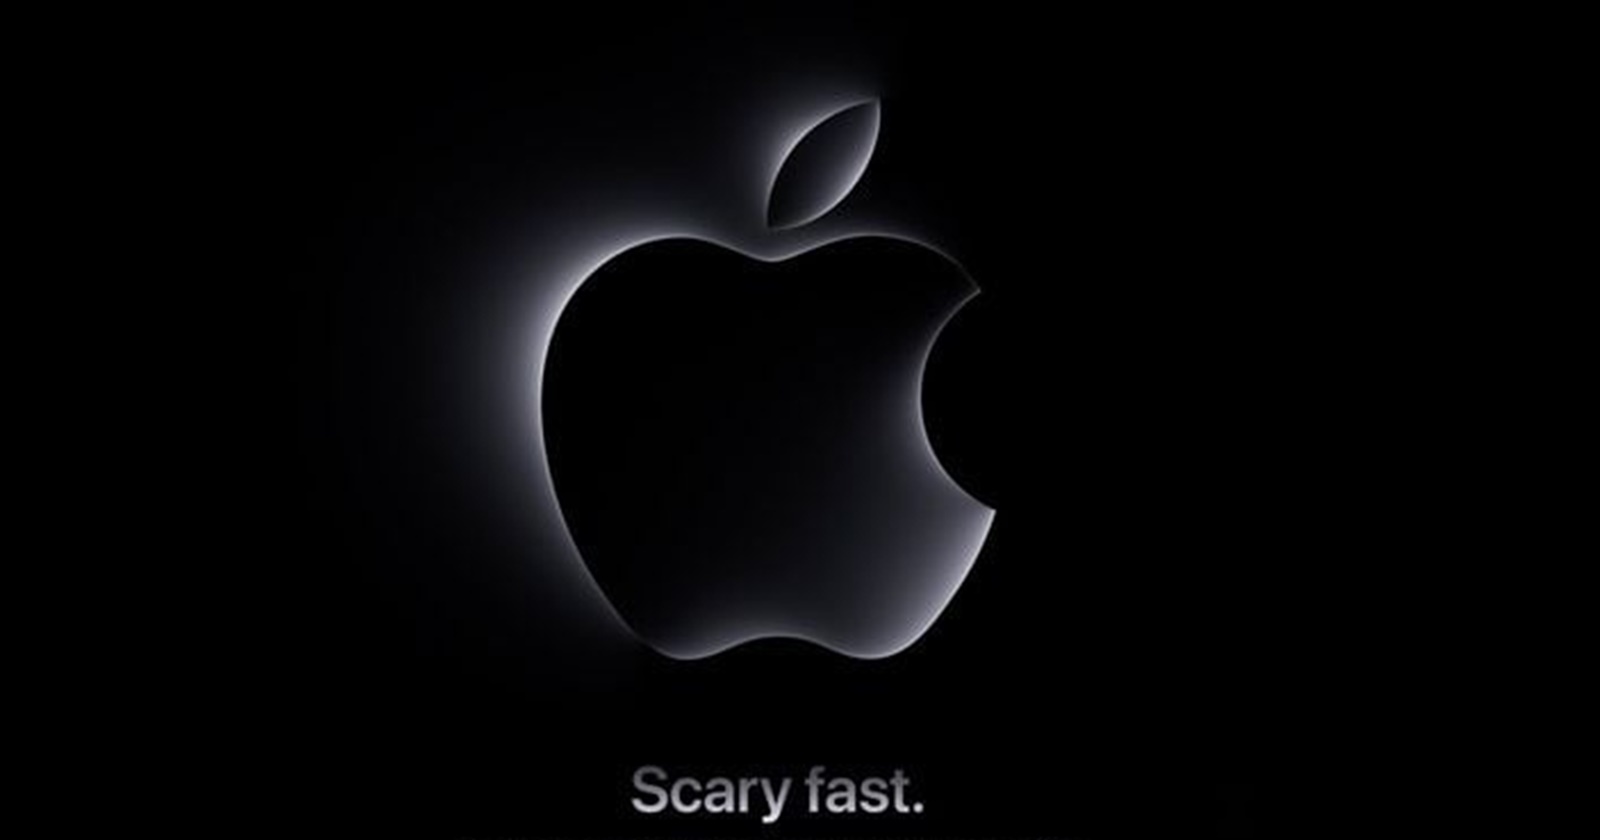 New Macs coming: Apple announces its last event, Scary Fast